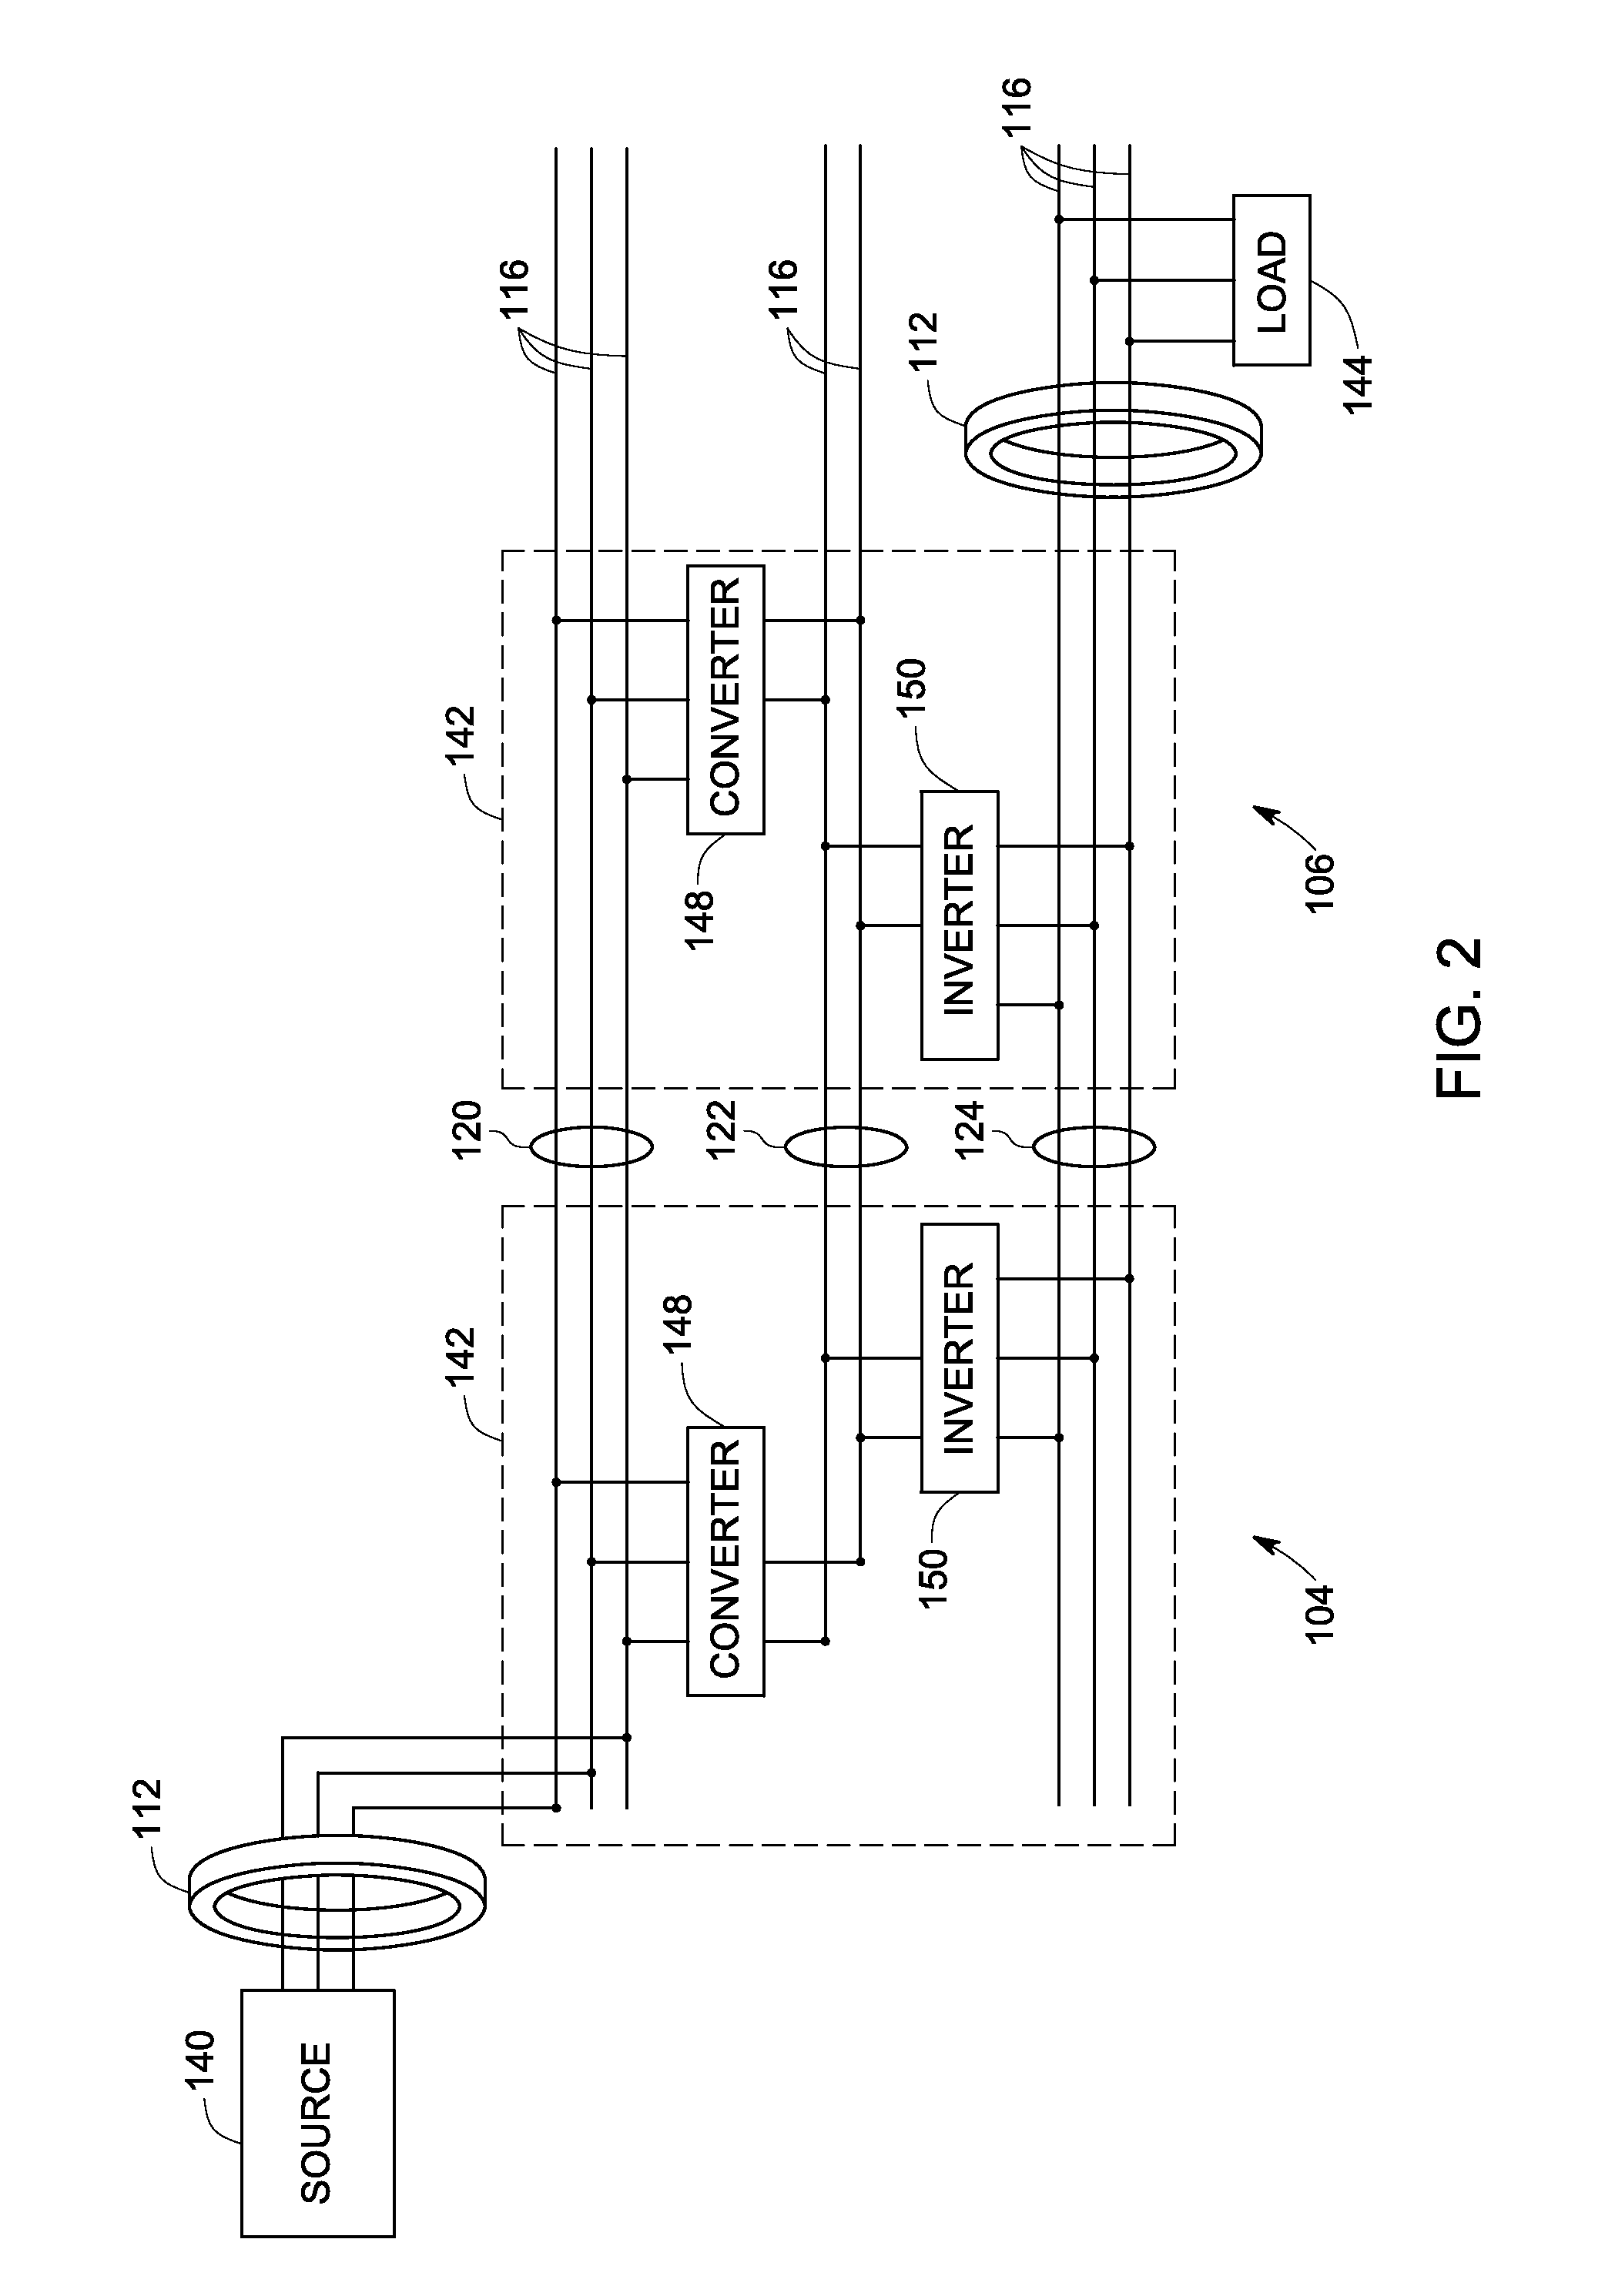 Common mode magnetic device for bus structure